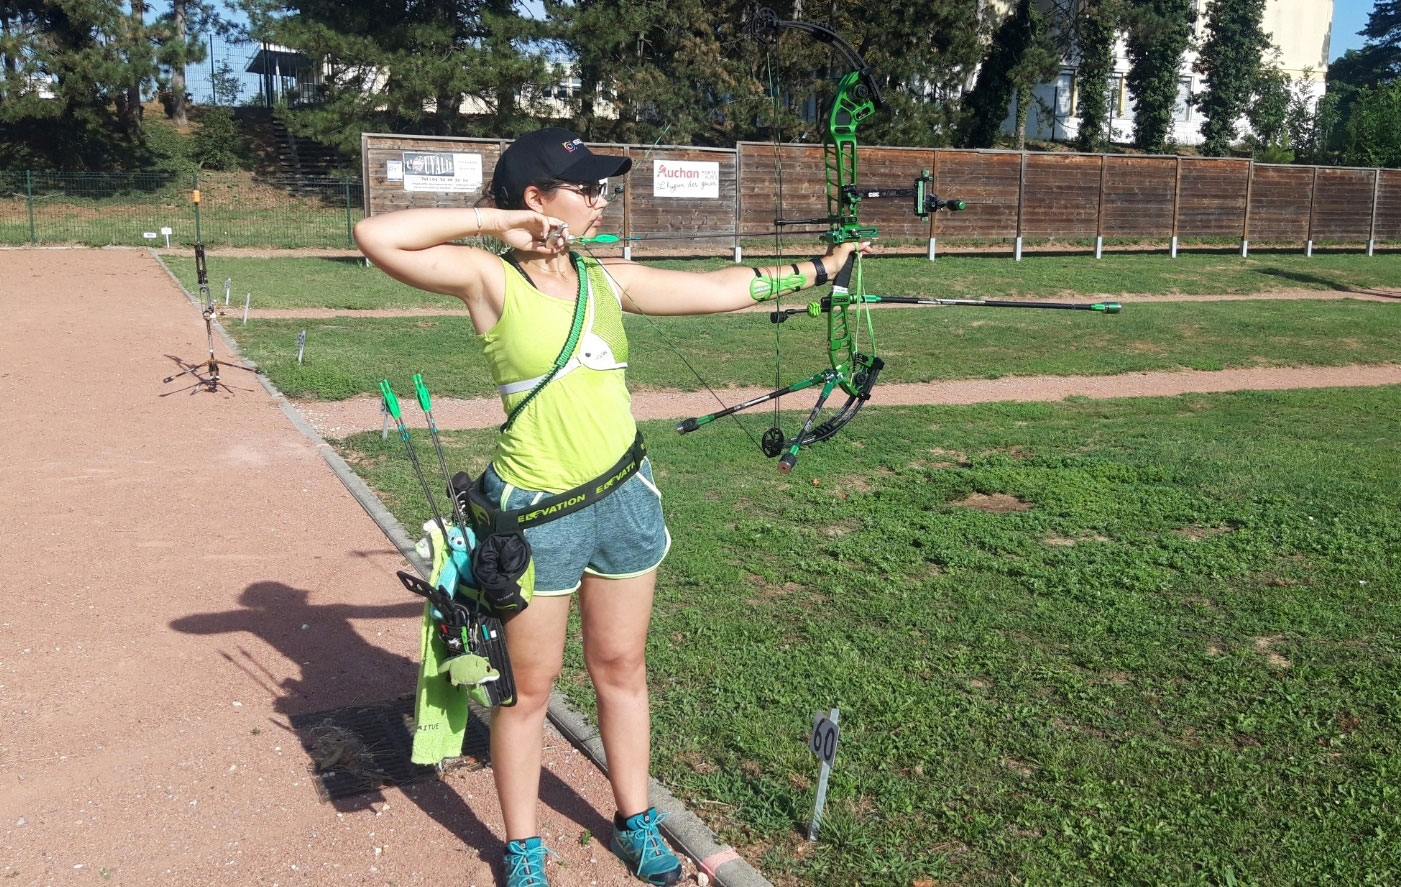 Hero X10 compound bow Pratise Shooting review by Mathilde Barbier, France archer